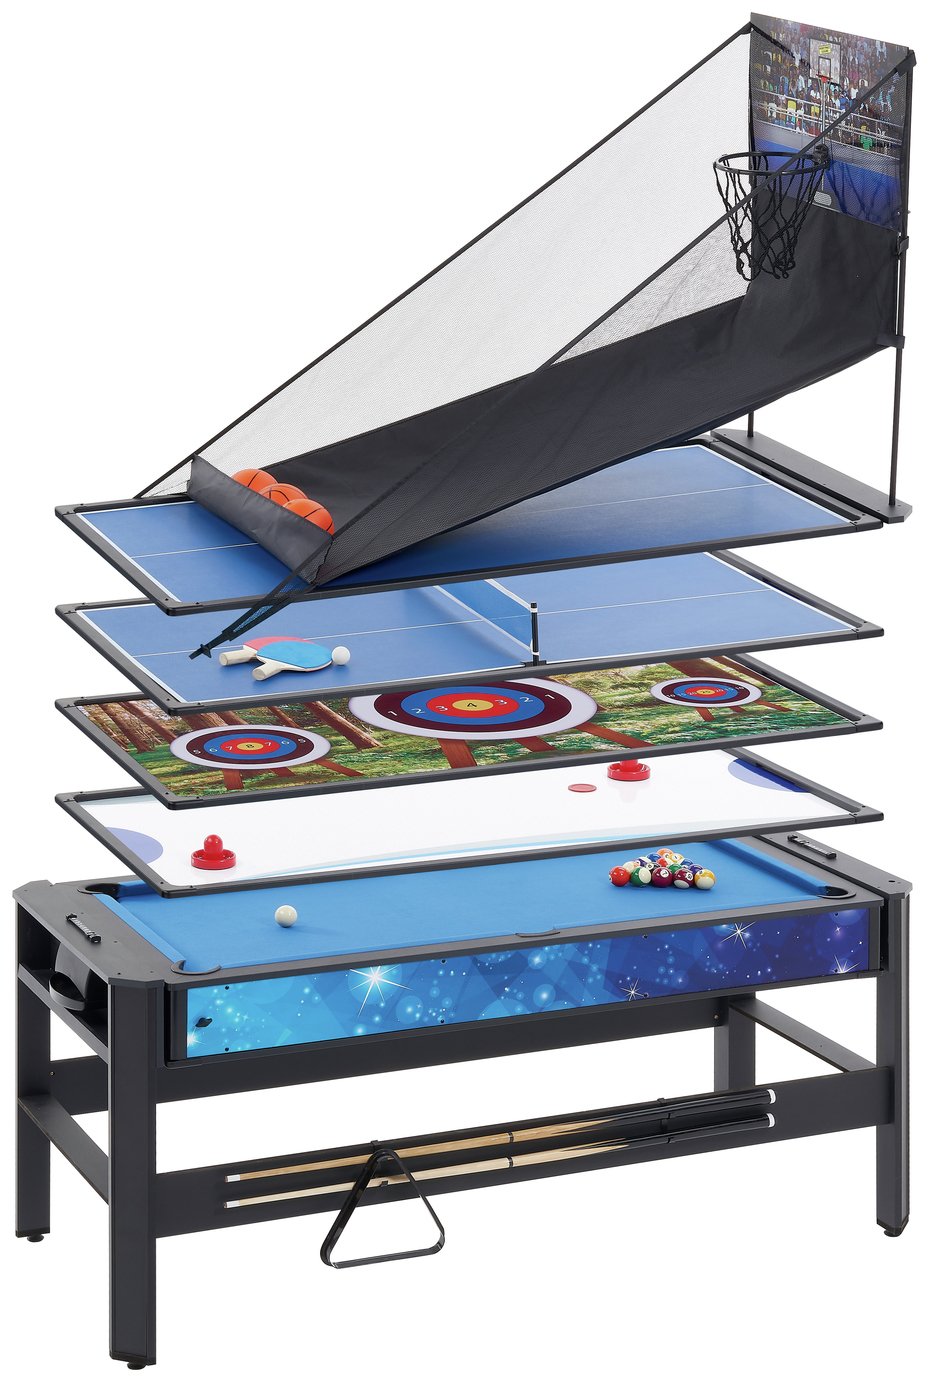 Mightymast 6ft Pentagon 5 in 1 Multigames Table